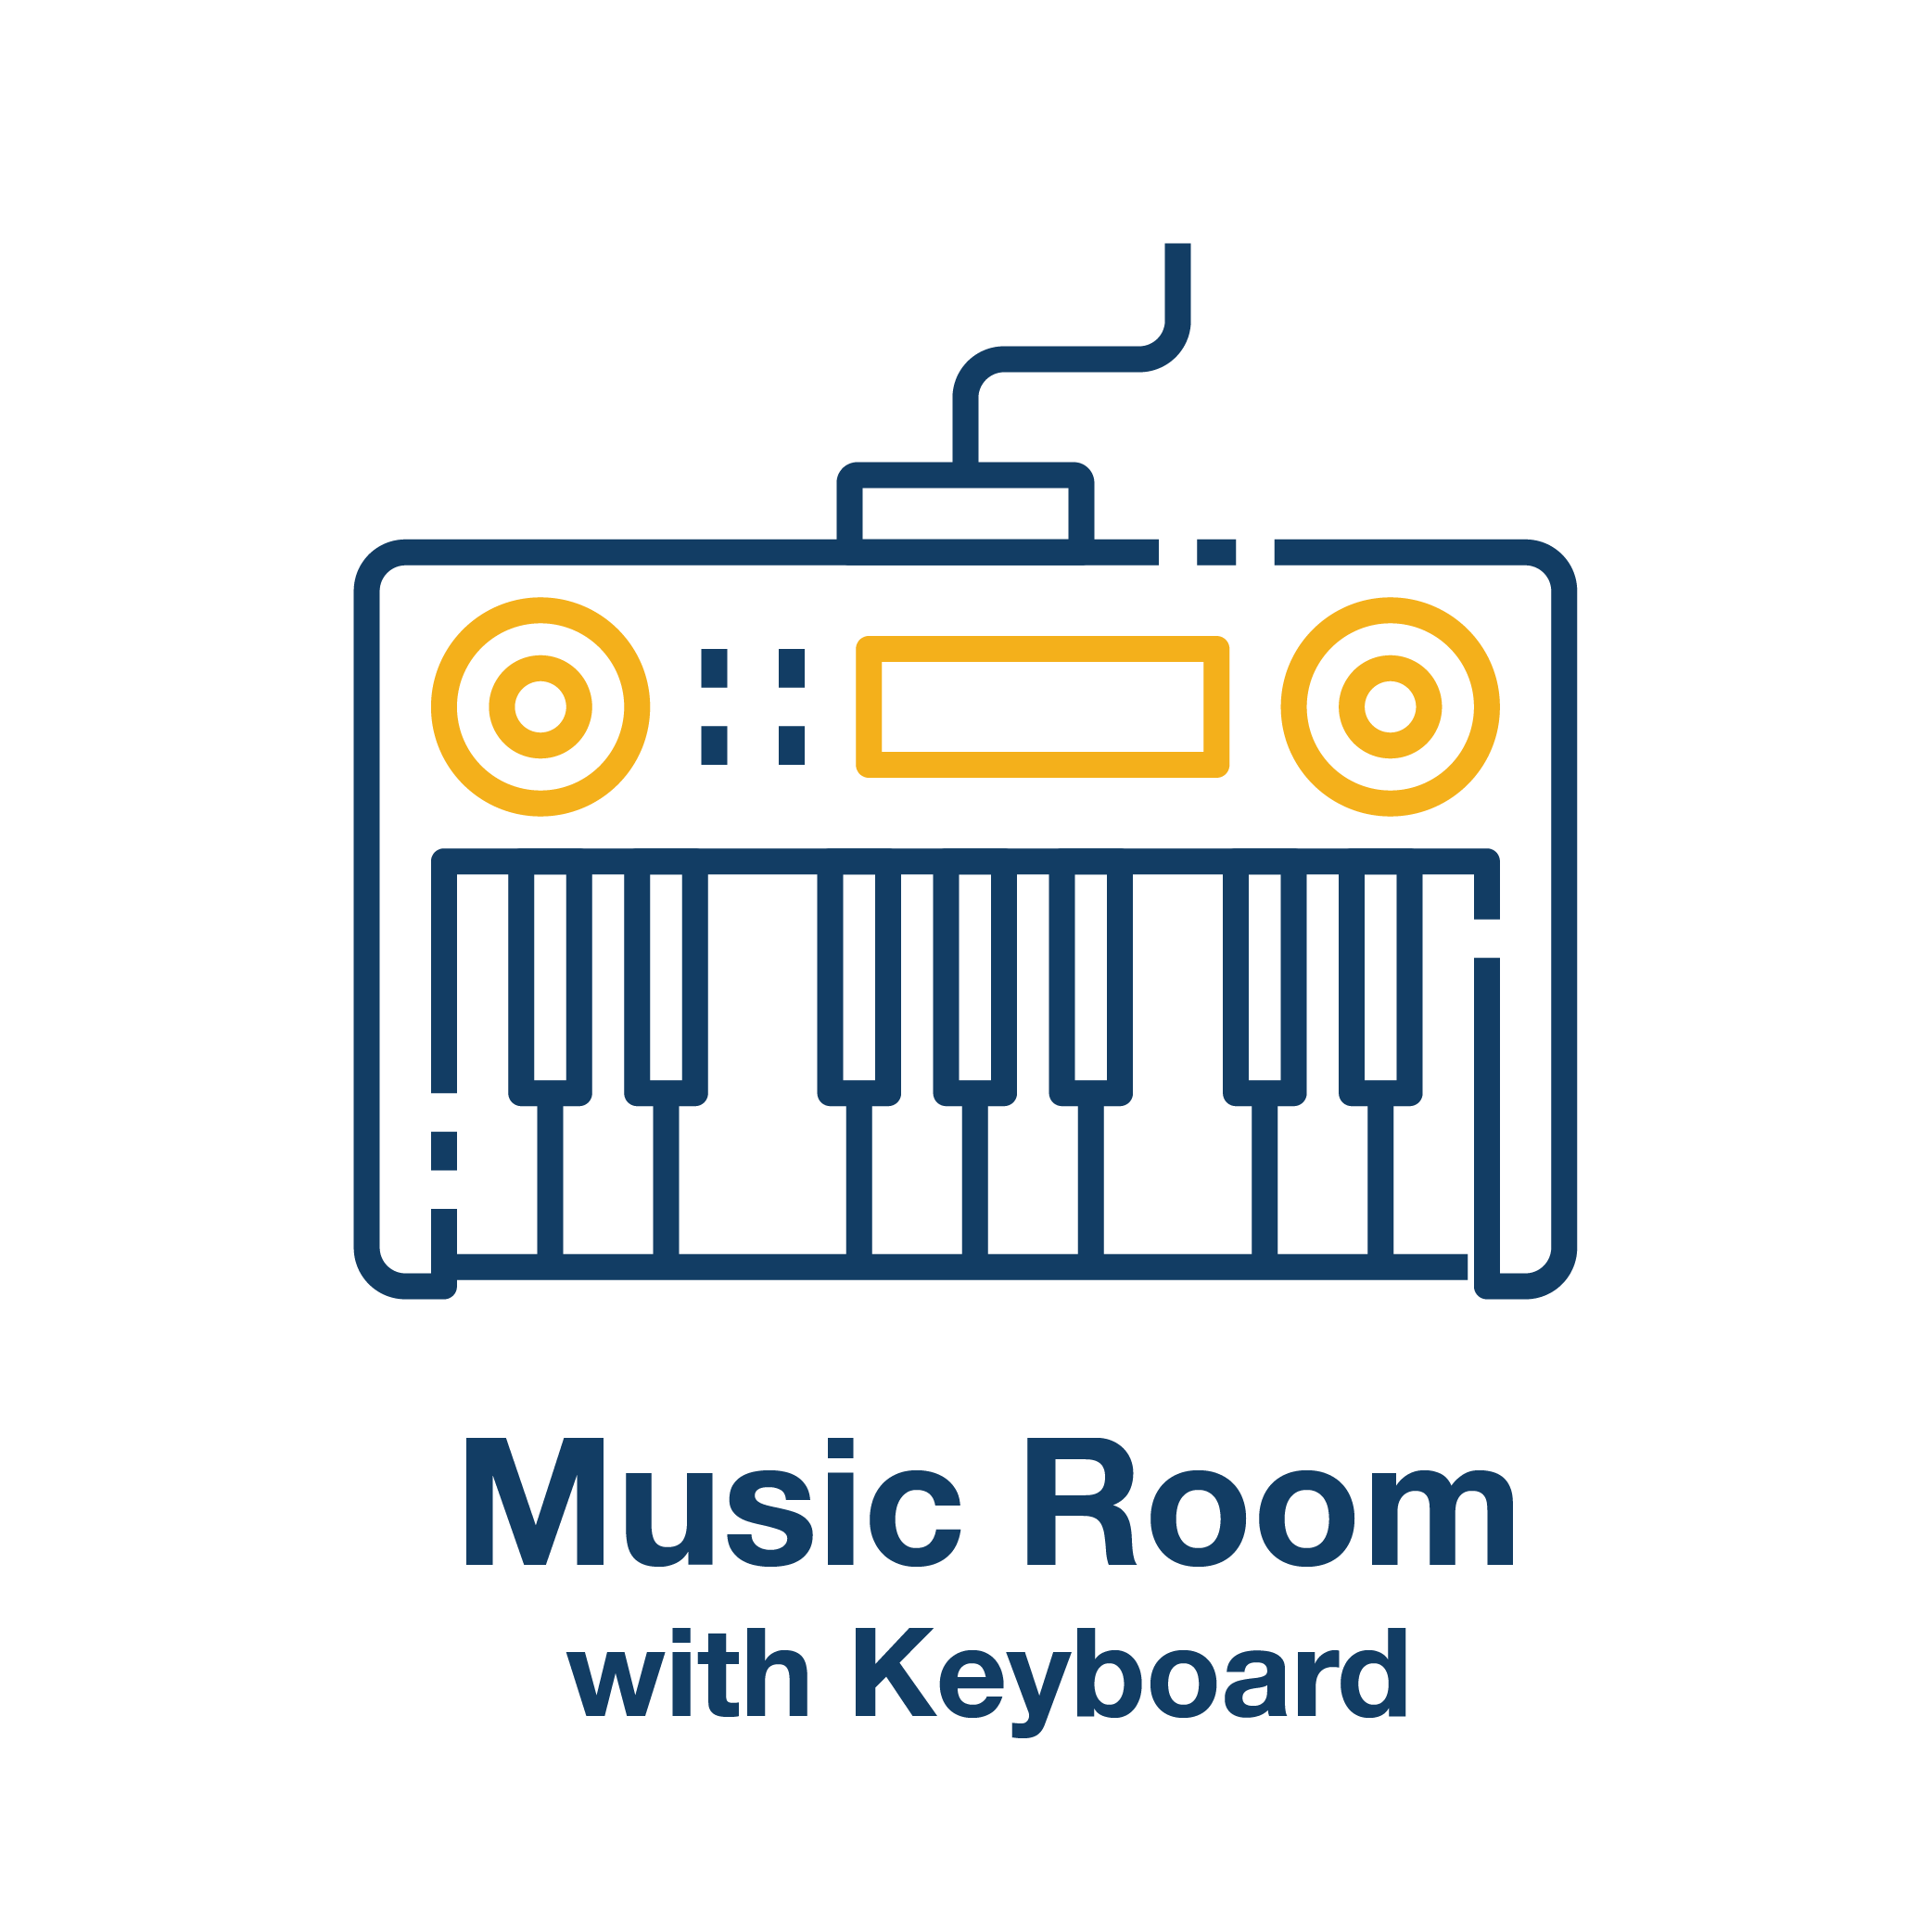 Music Room with Keyboard